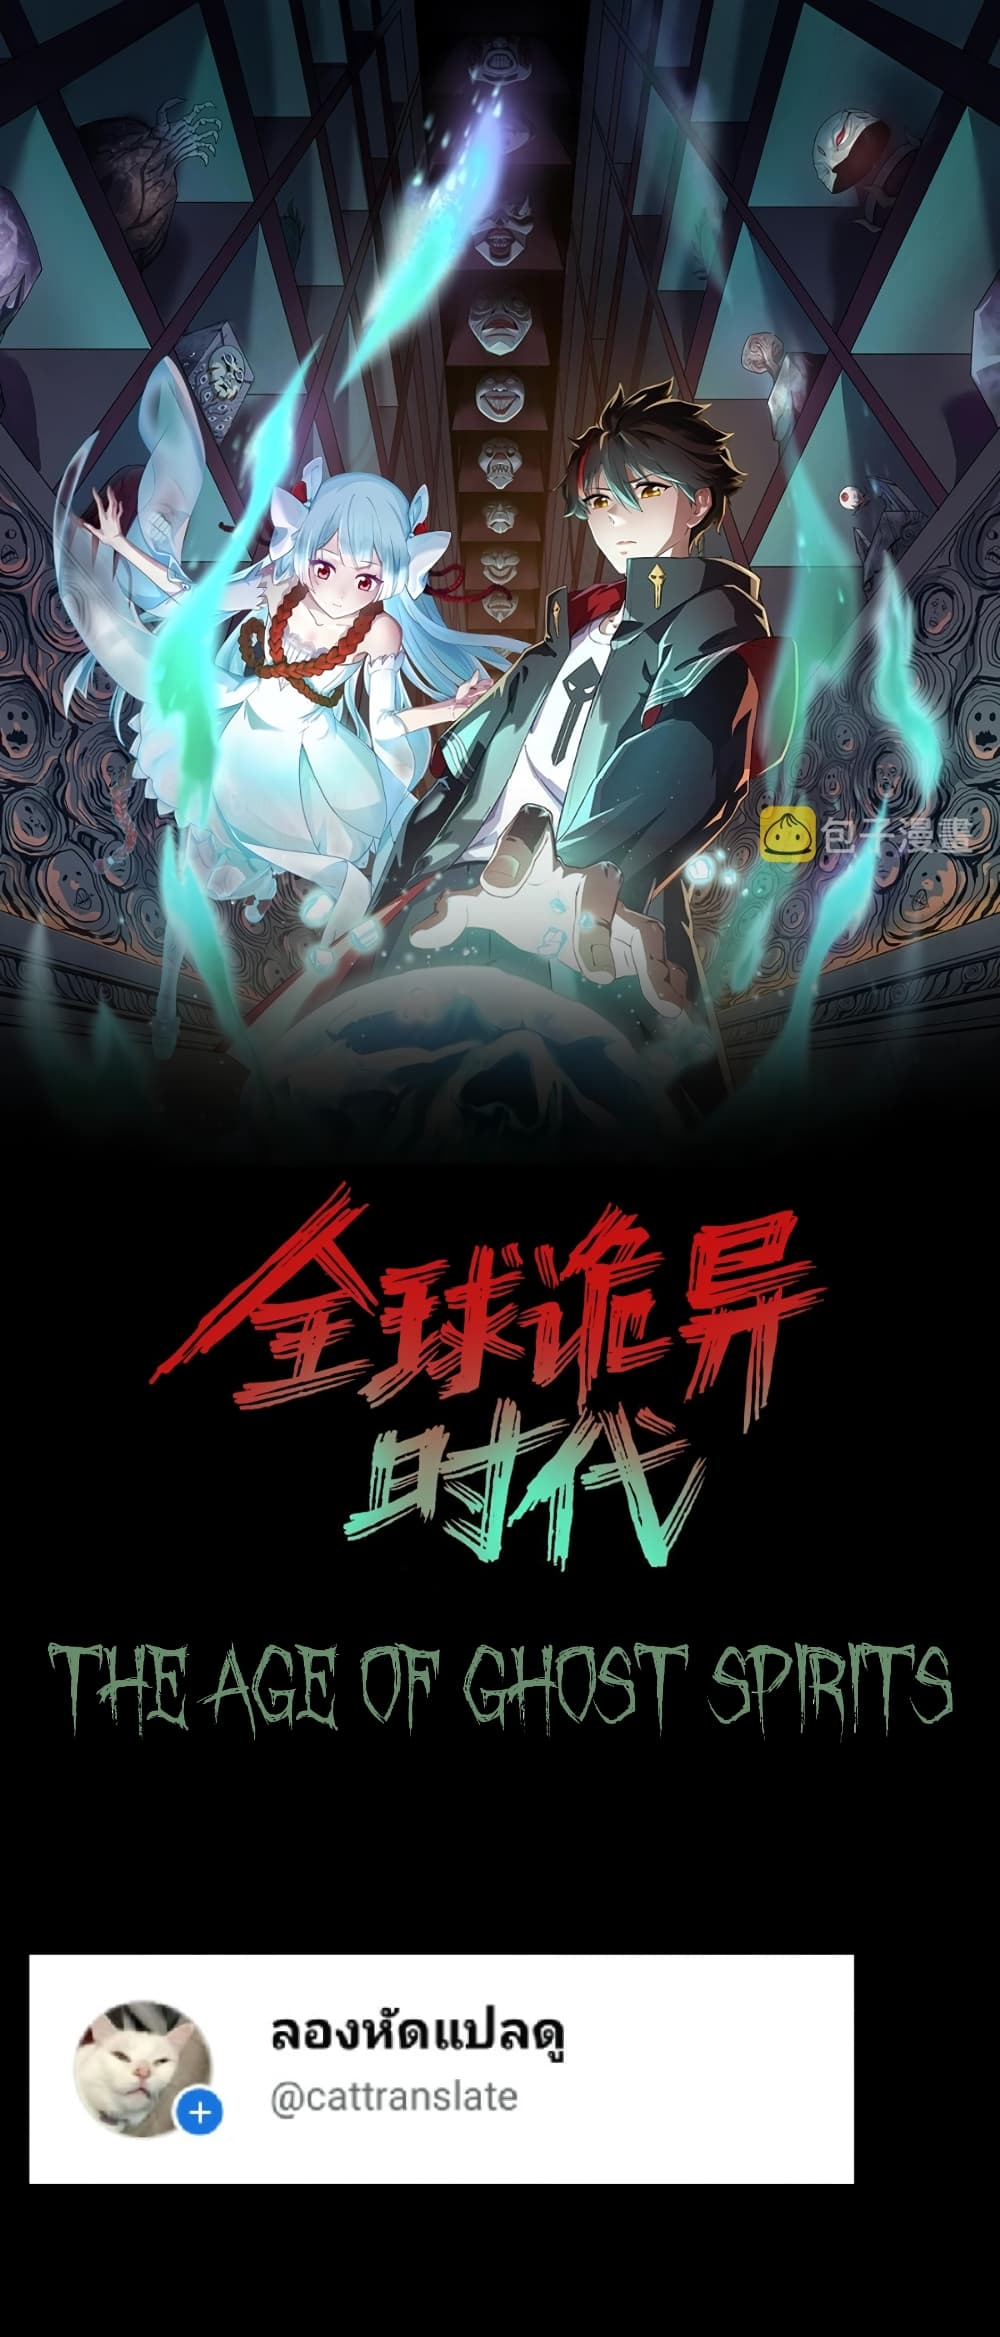 The Age of Ghost Spirits à¸à¸­à¸à¸à¸µà¹ 20 (1)